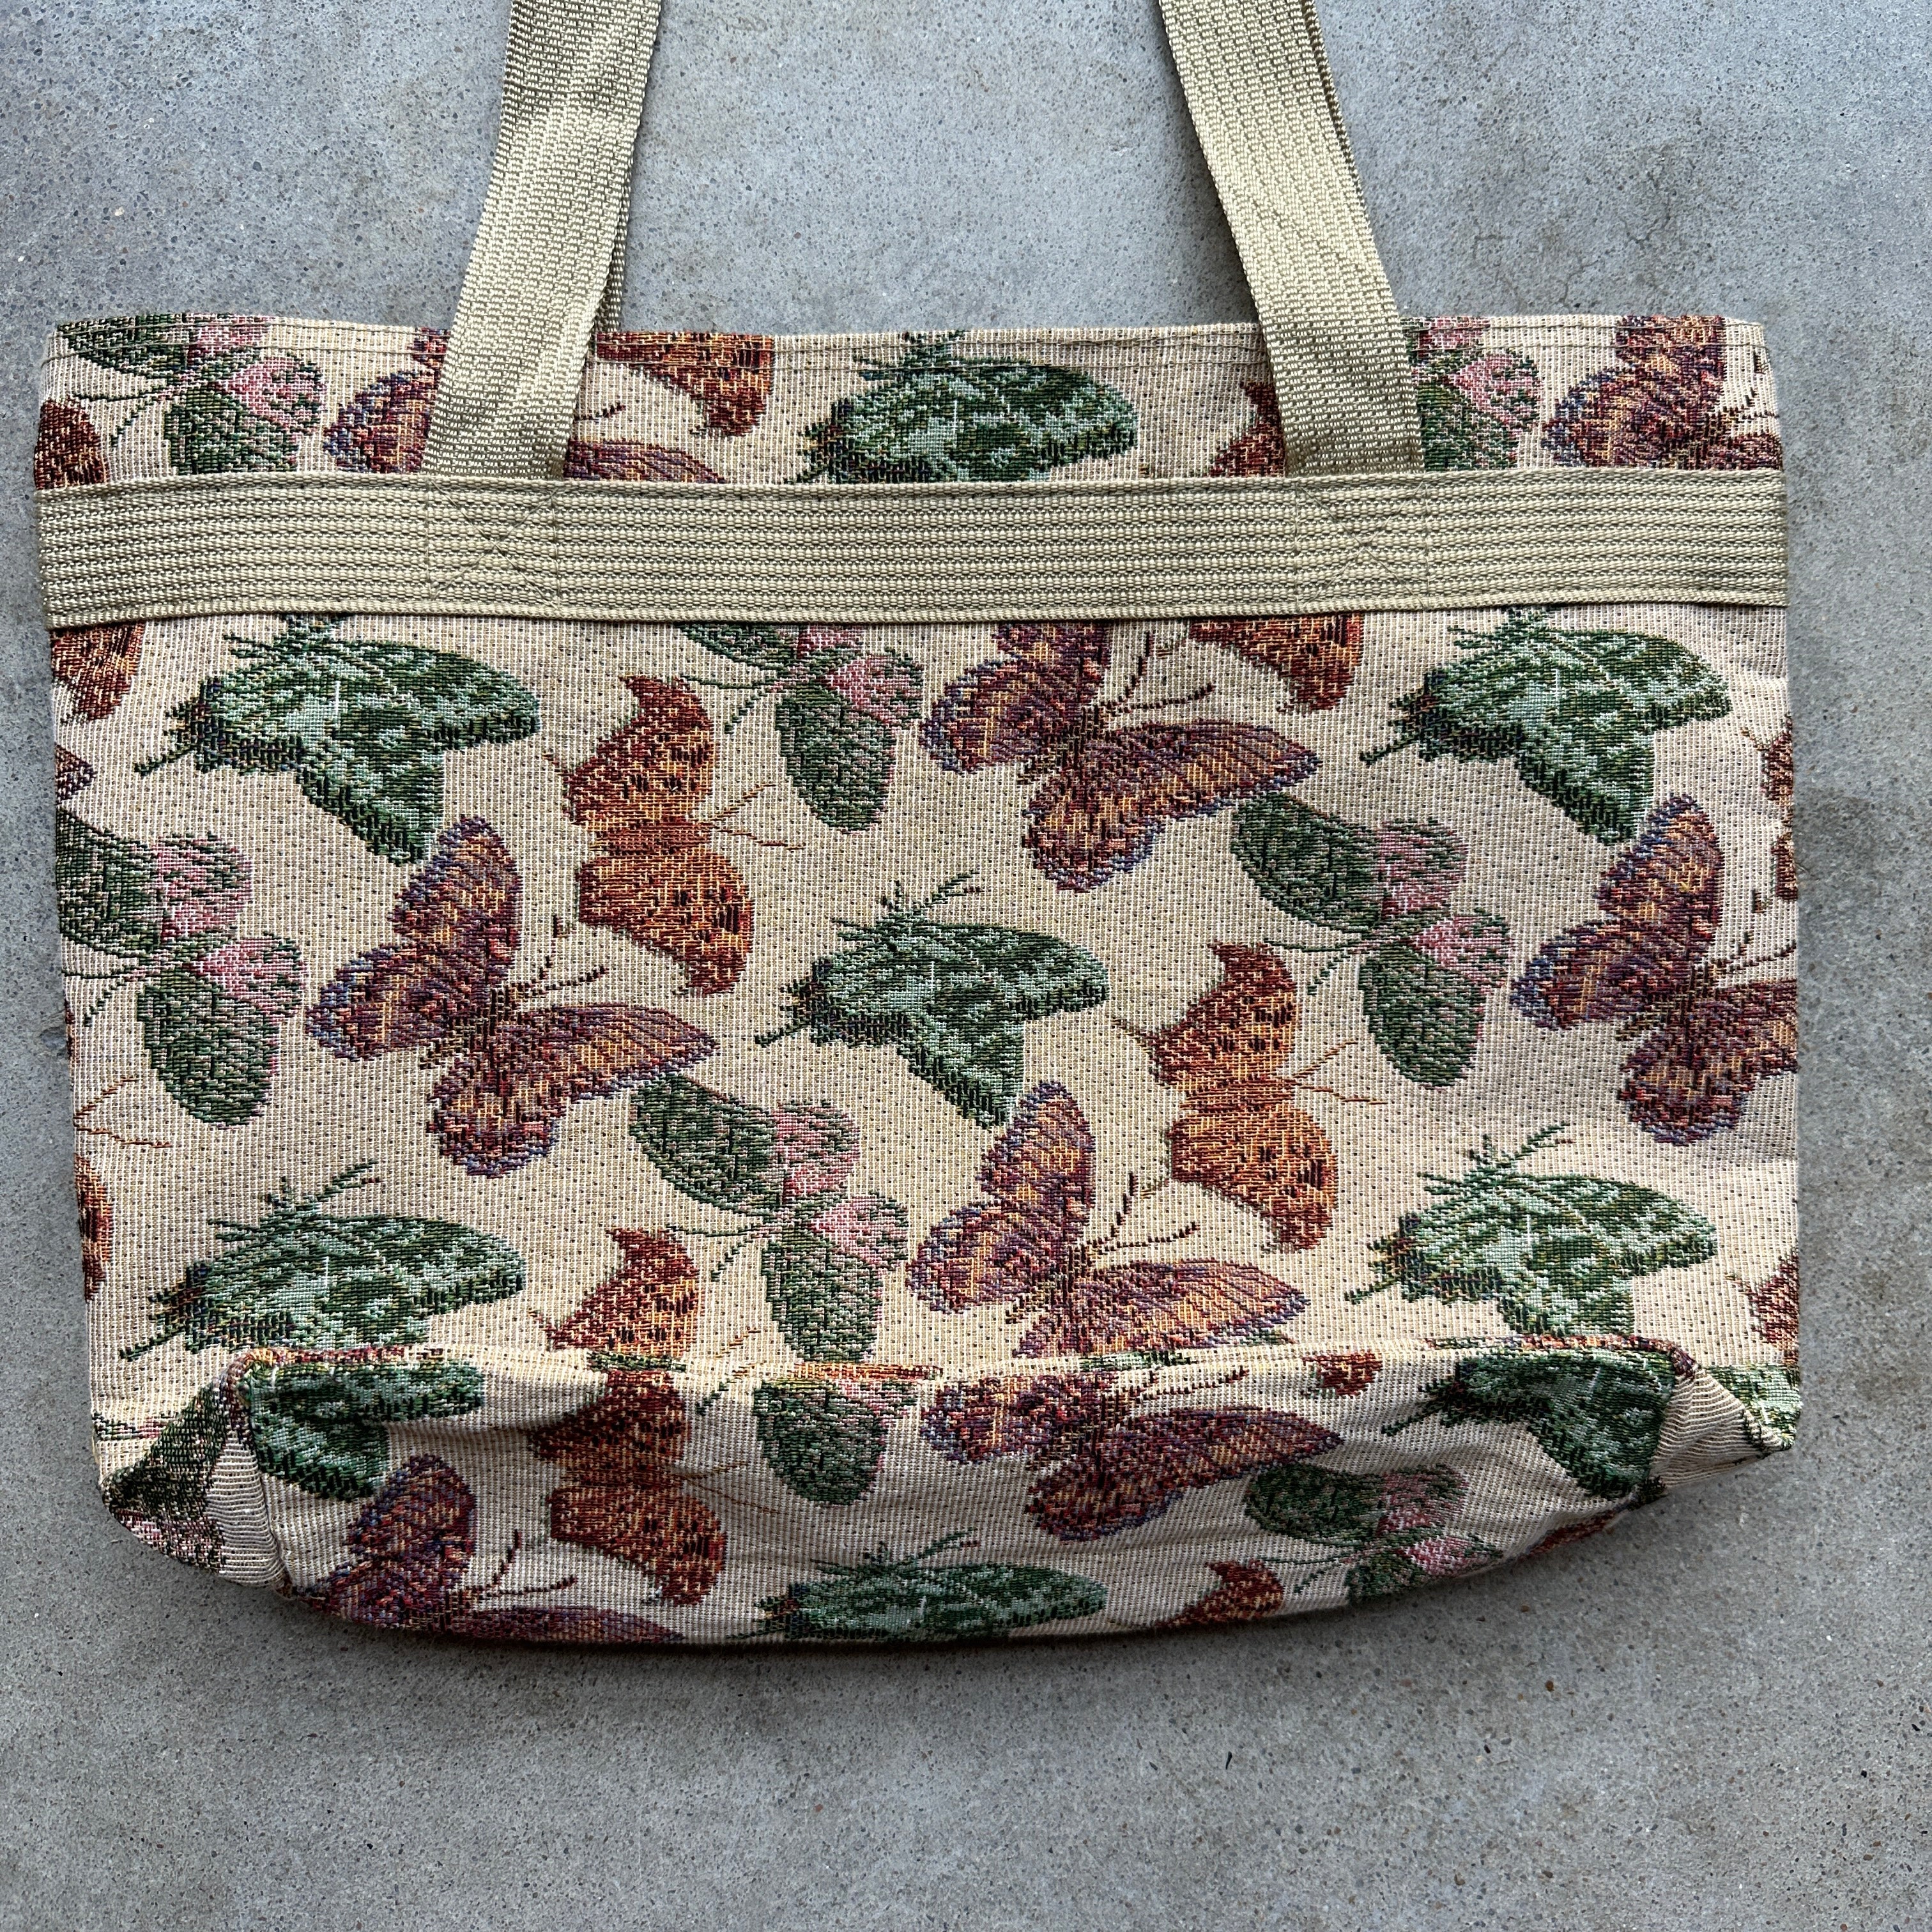 Tan butterfly print large tote bag